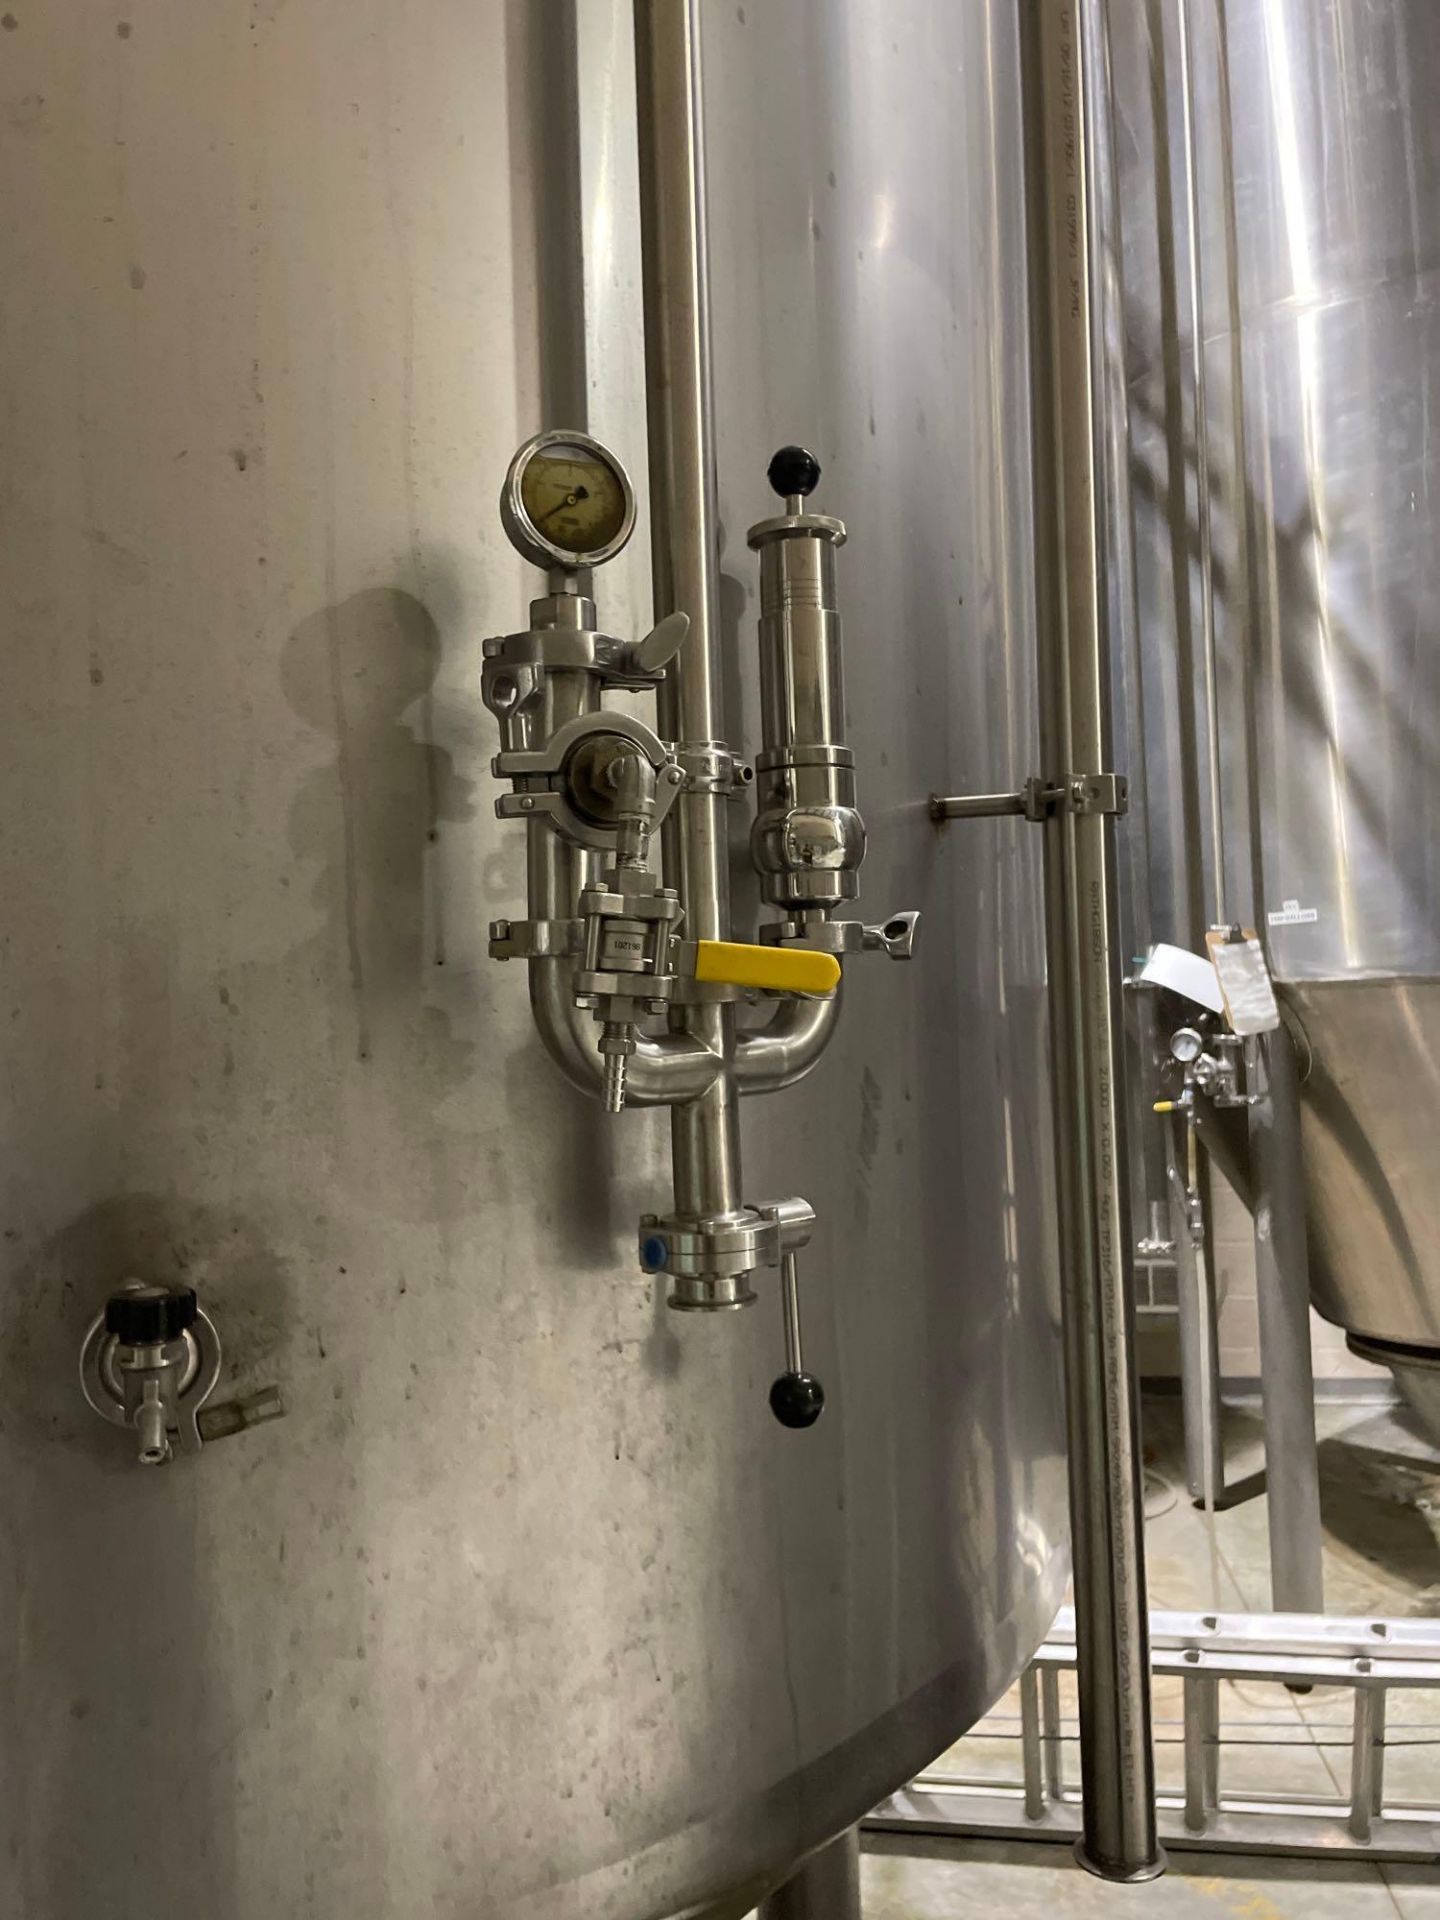 50 BBL SS Fermentation Vessel, Glycol Jacketed - Image 4 of 6